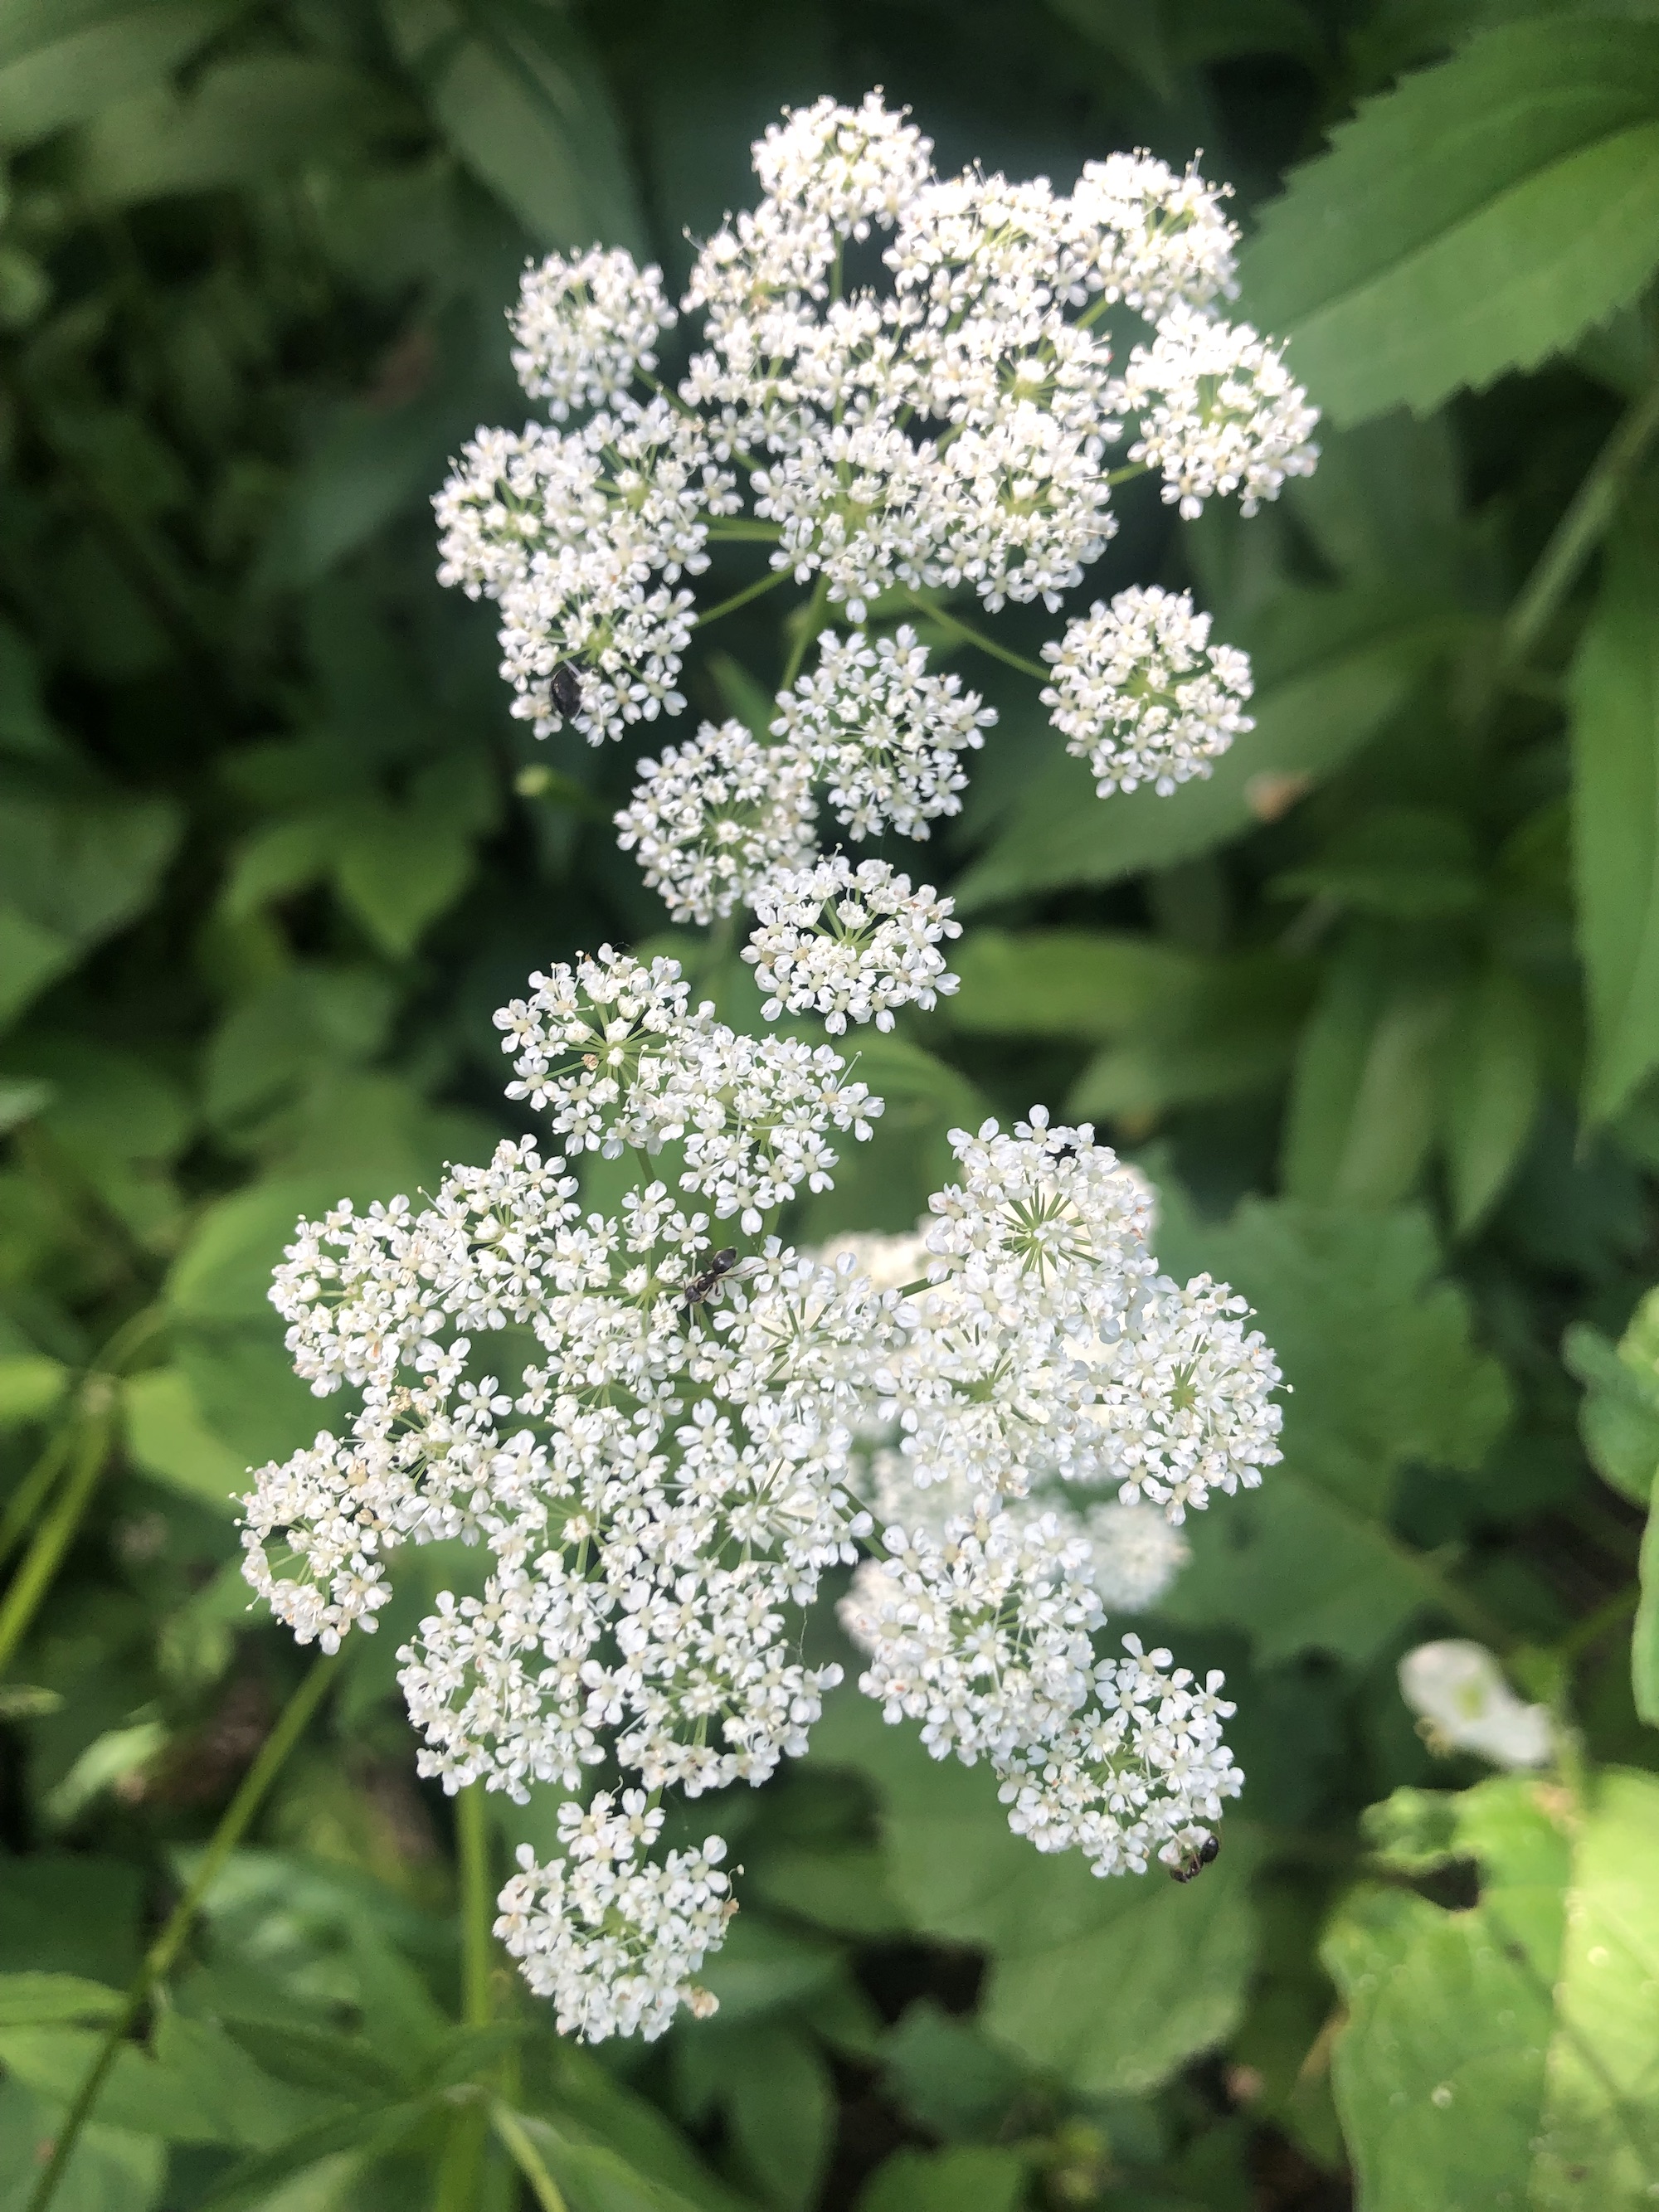 Goutweed along bike path behind Gregory Street in Madison, Wisconsin on June 22, 2022.